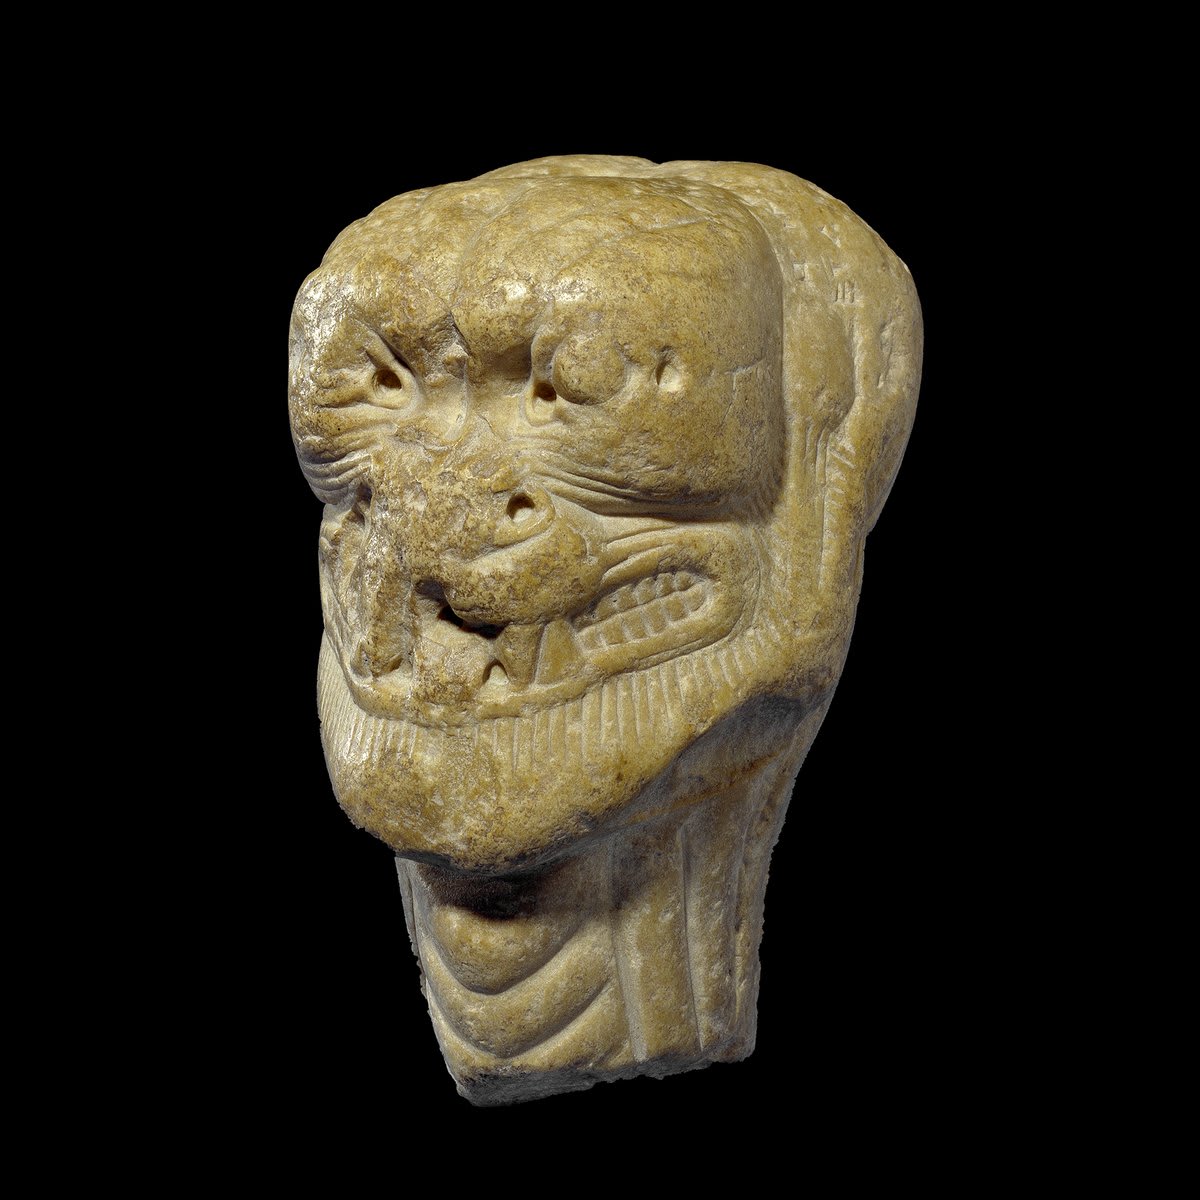 This limestone head shows Pazuzu – an ancient Assyrian demon usually depicted with a scaly body, bird’s talons and a scorpion's tail. Film fact: Pazuzu appeared as the demon who possesses Regan in ‘The Exorcist’